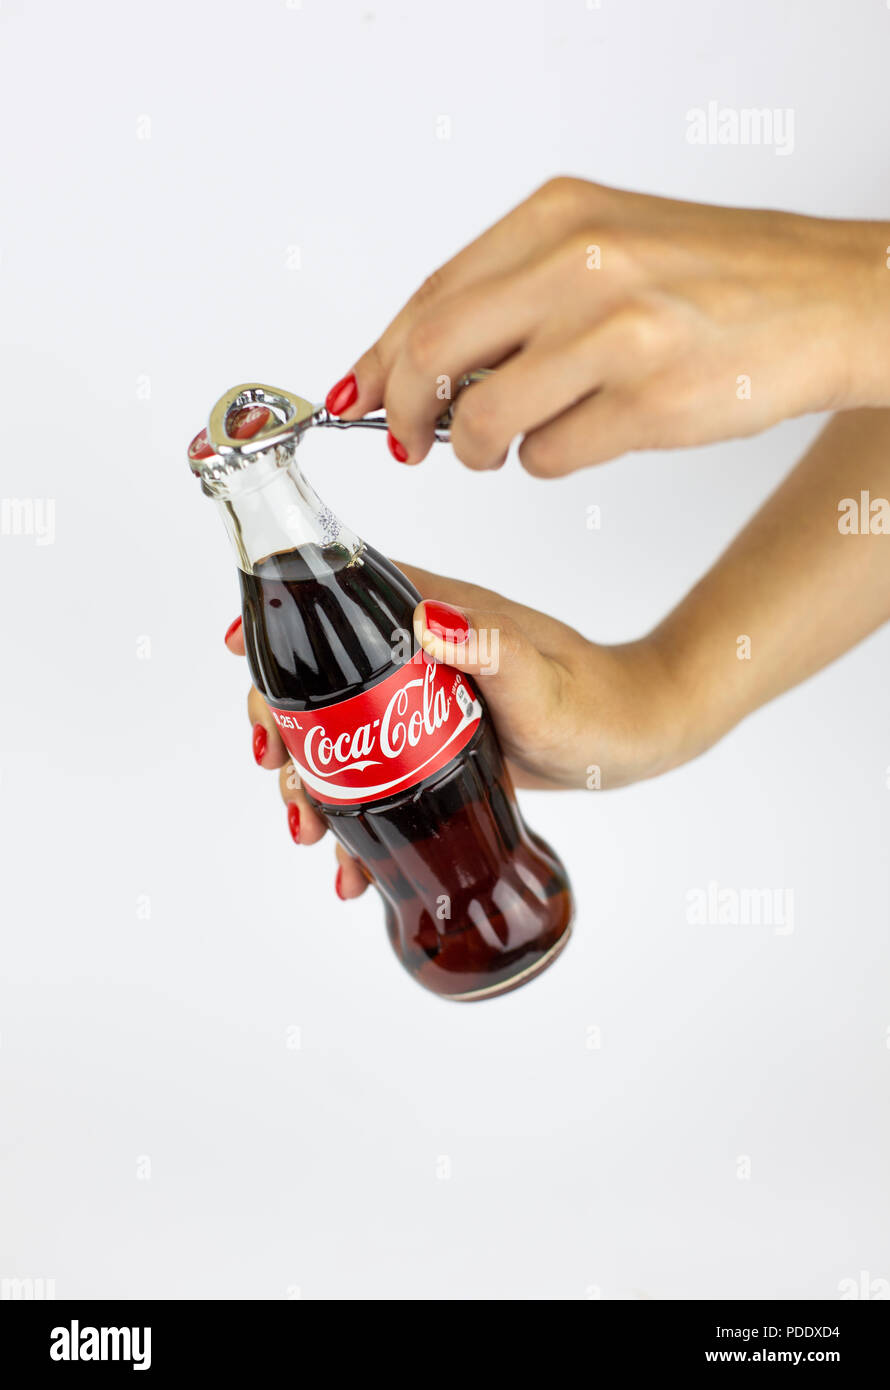 Atlanta, Georgia, USA - July 22, 2018: woman hand with red nails holding vintage historical embossed glass coca-cola contour classic bottle from Spain on white background opening with metal coca-cola brand opener Stock Photo